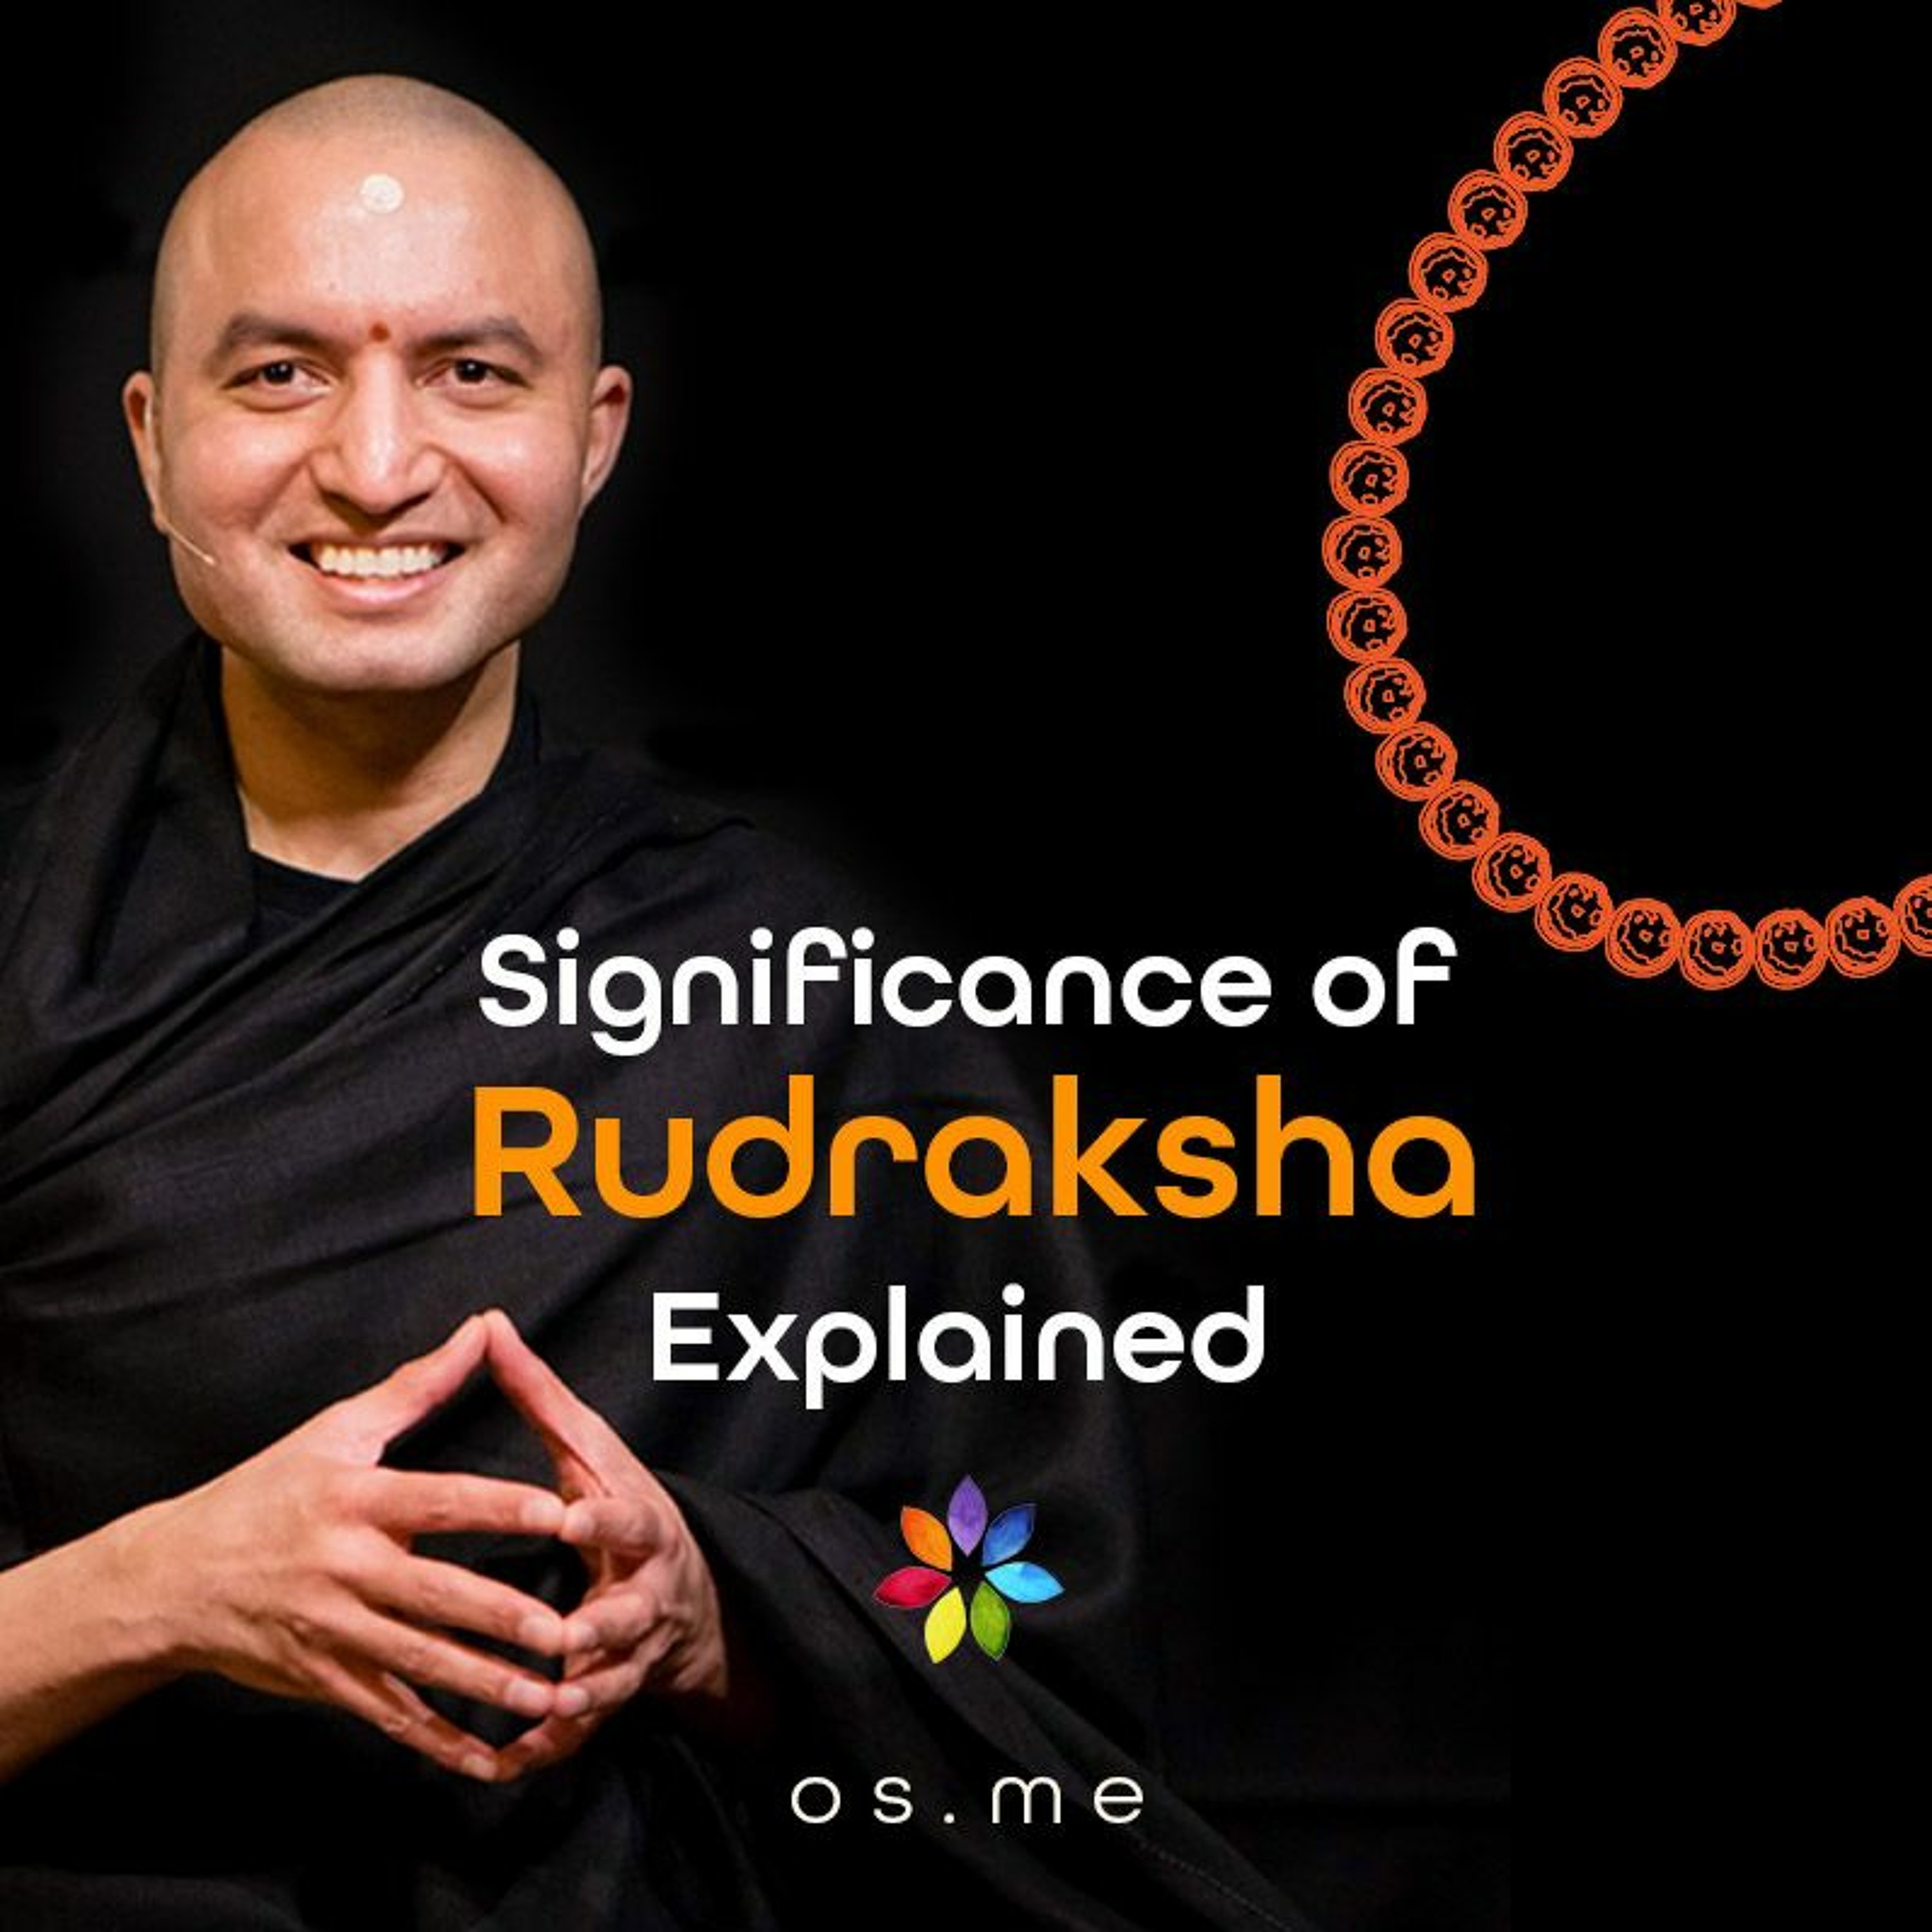 What Is The Significance Of Rudraksha [Hindi]